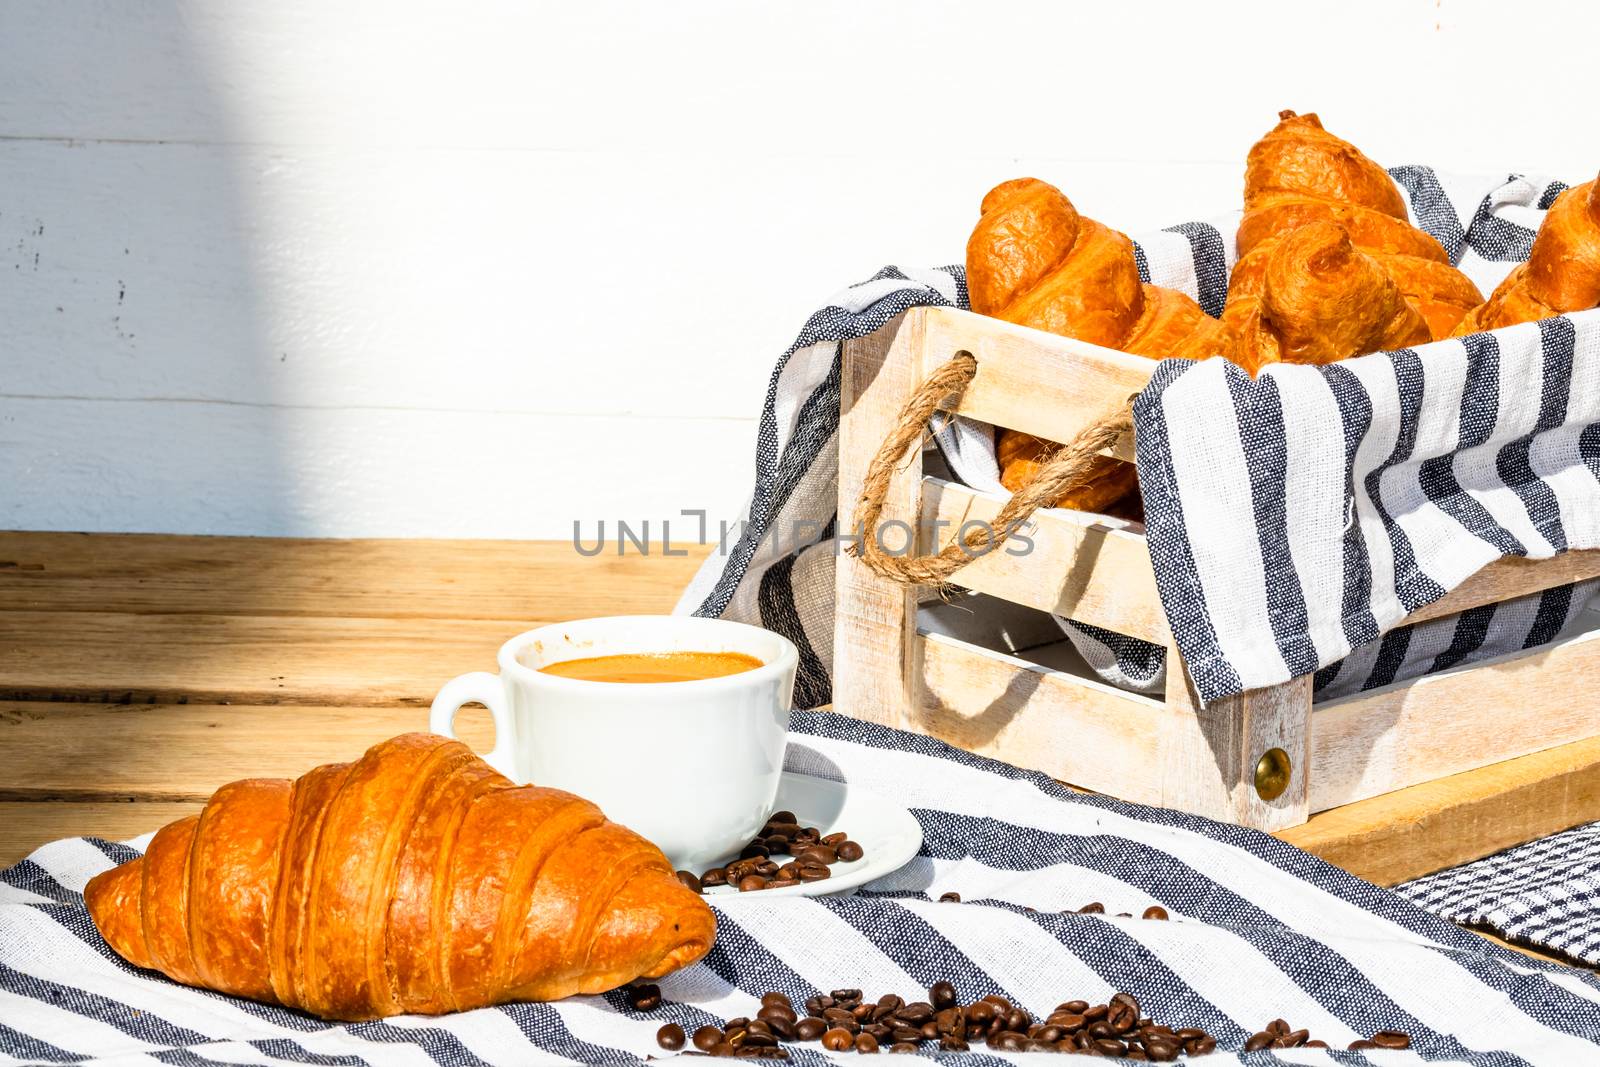 Puff pastry, coffee cup and buttered French croissant on wooden crate. Food and breakfast concept. Detail of coffee desserts and fresh pastries